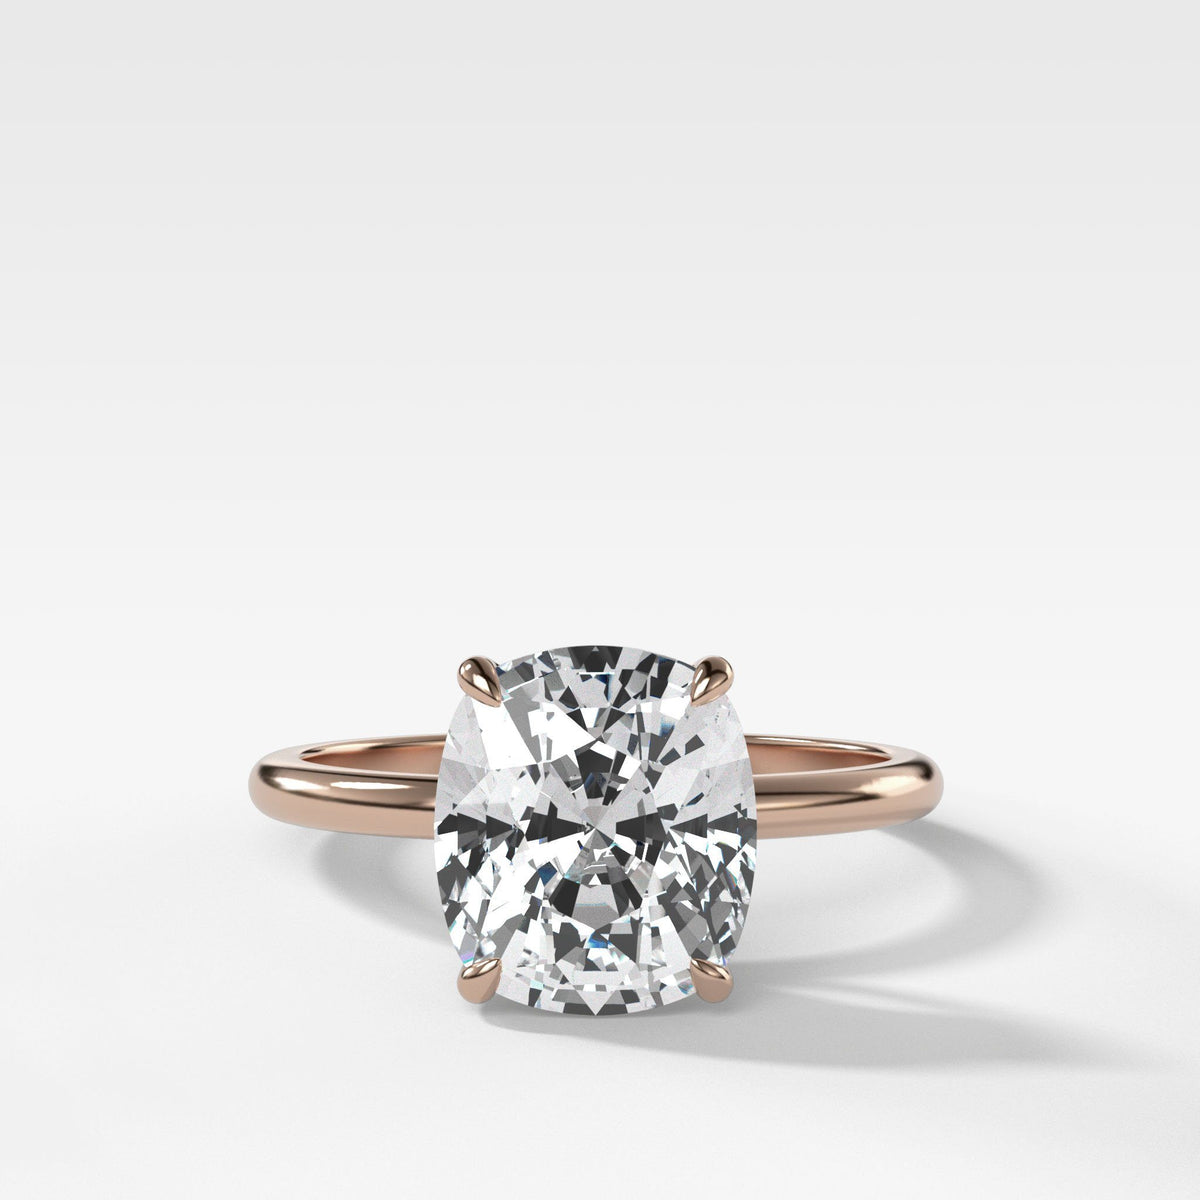 Thin + Simple Solitaire With 3.18Ct Elongated Cushion Cut by Good Stone in Rose Gold